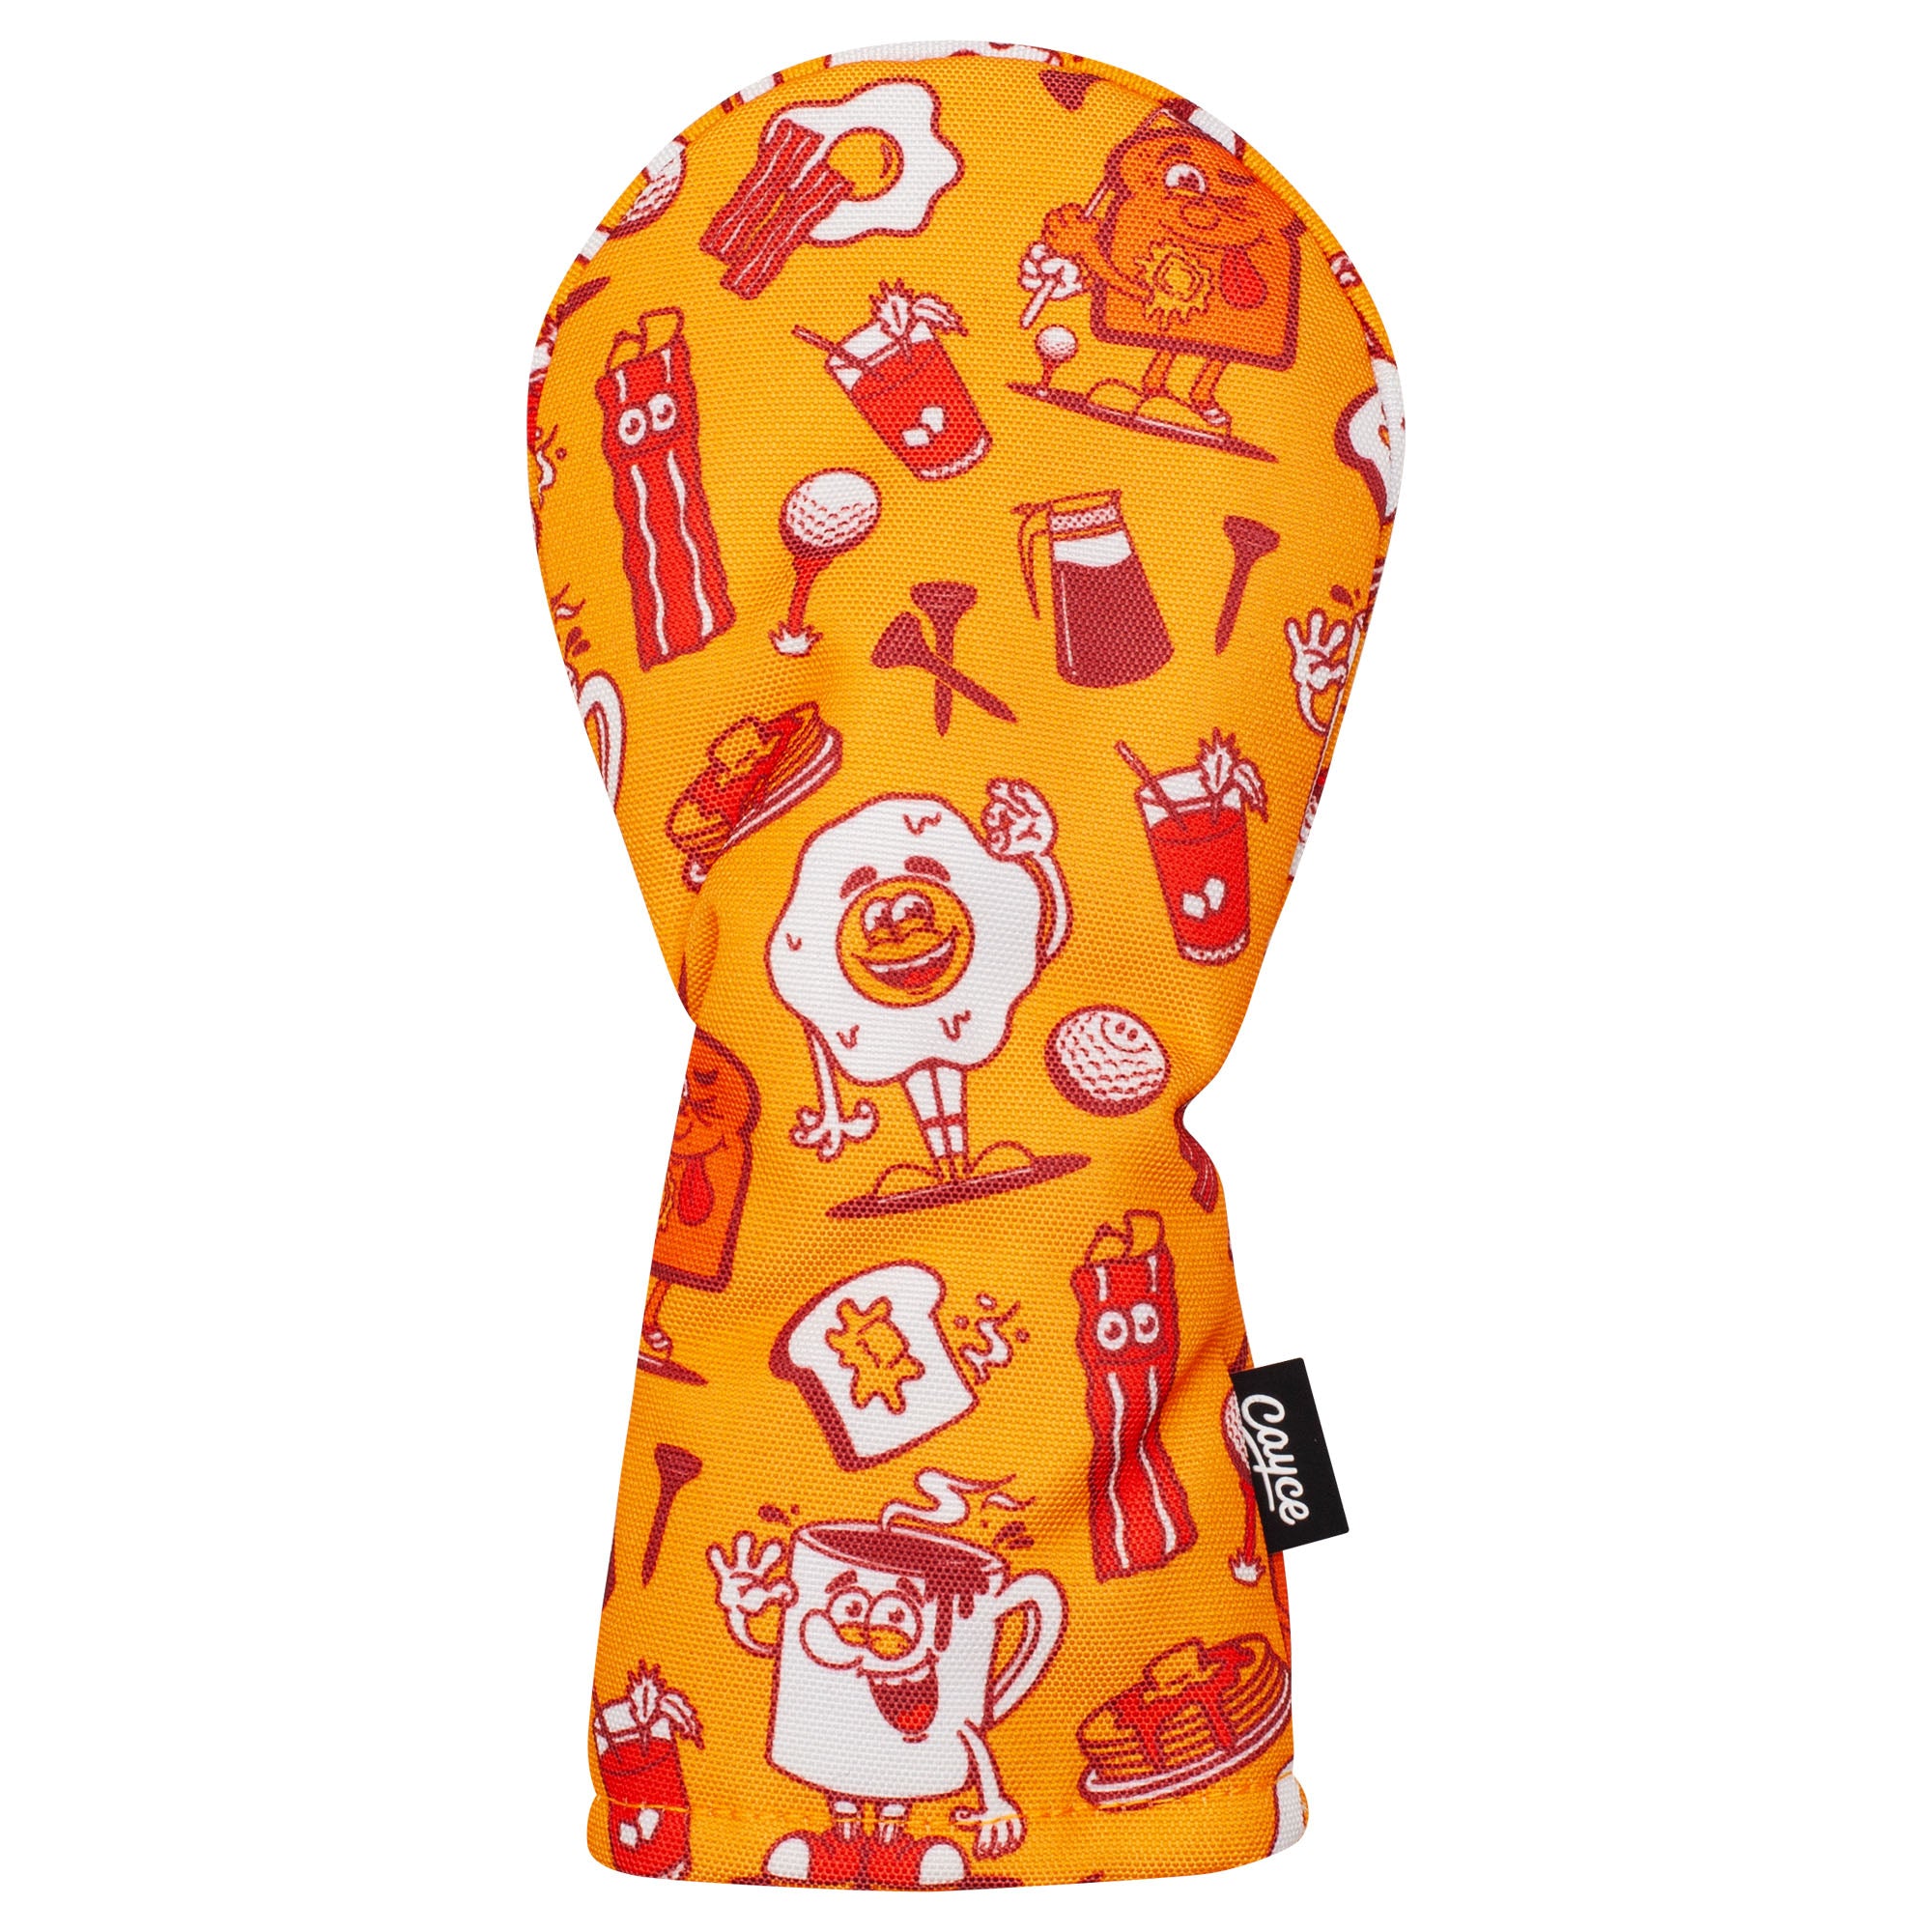 yellow, hourglass shaped hybrid golf headcover with a breakfast themed pattern including cartoon characters and breakfast items